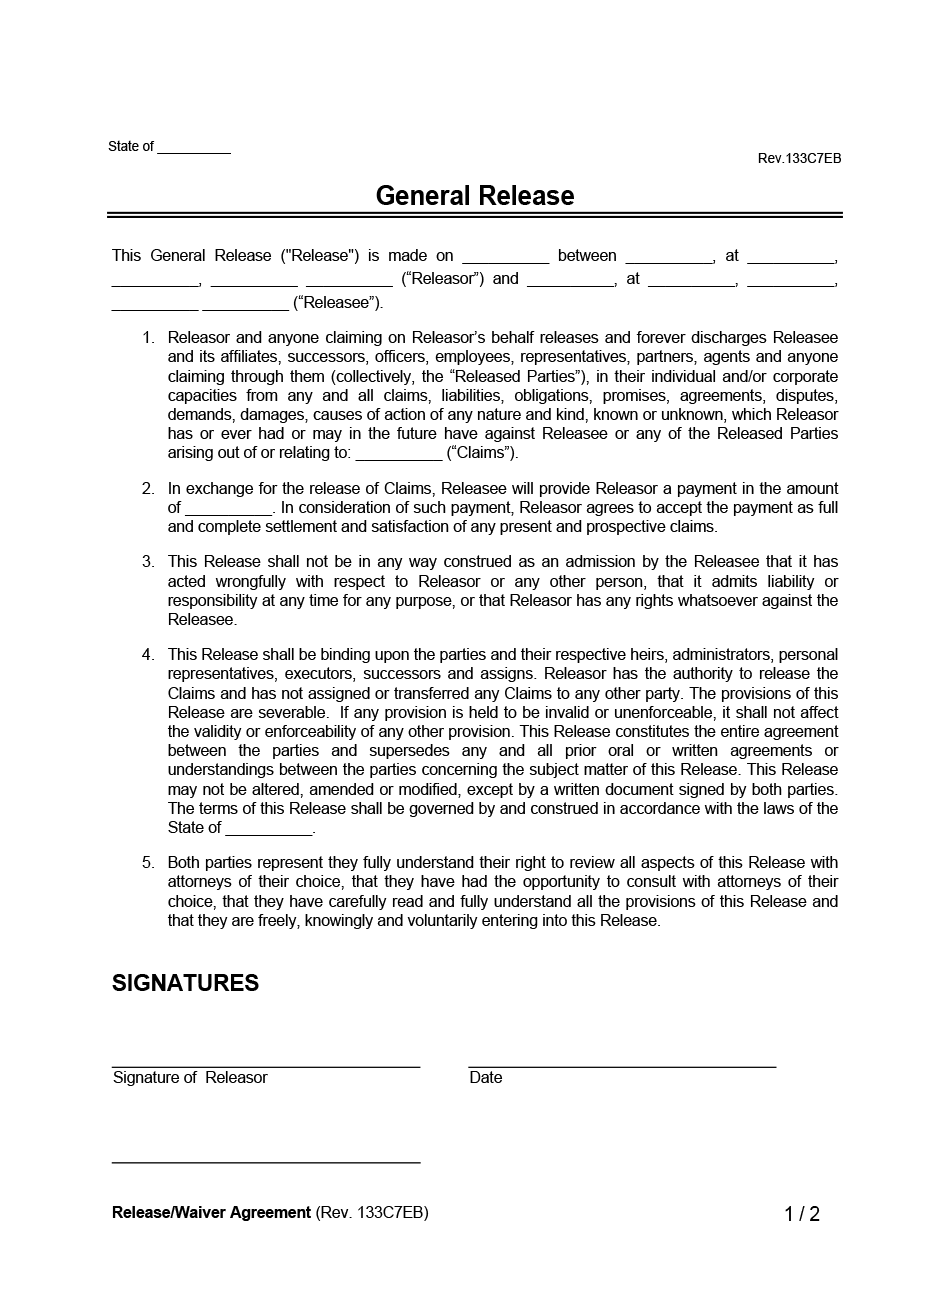 Release Waiver Agreement example form